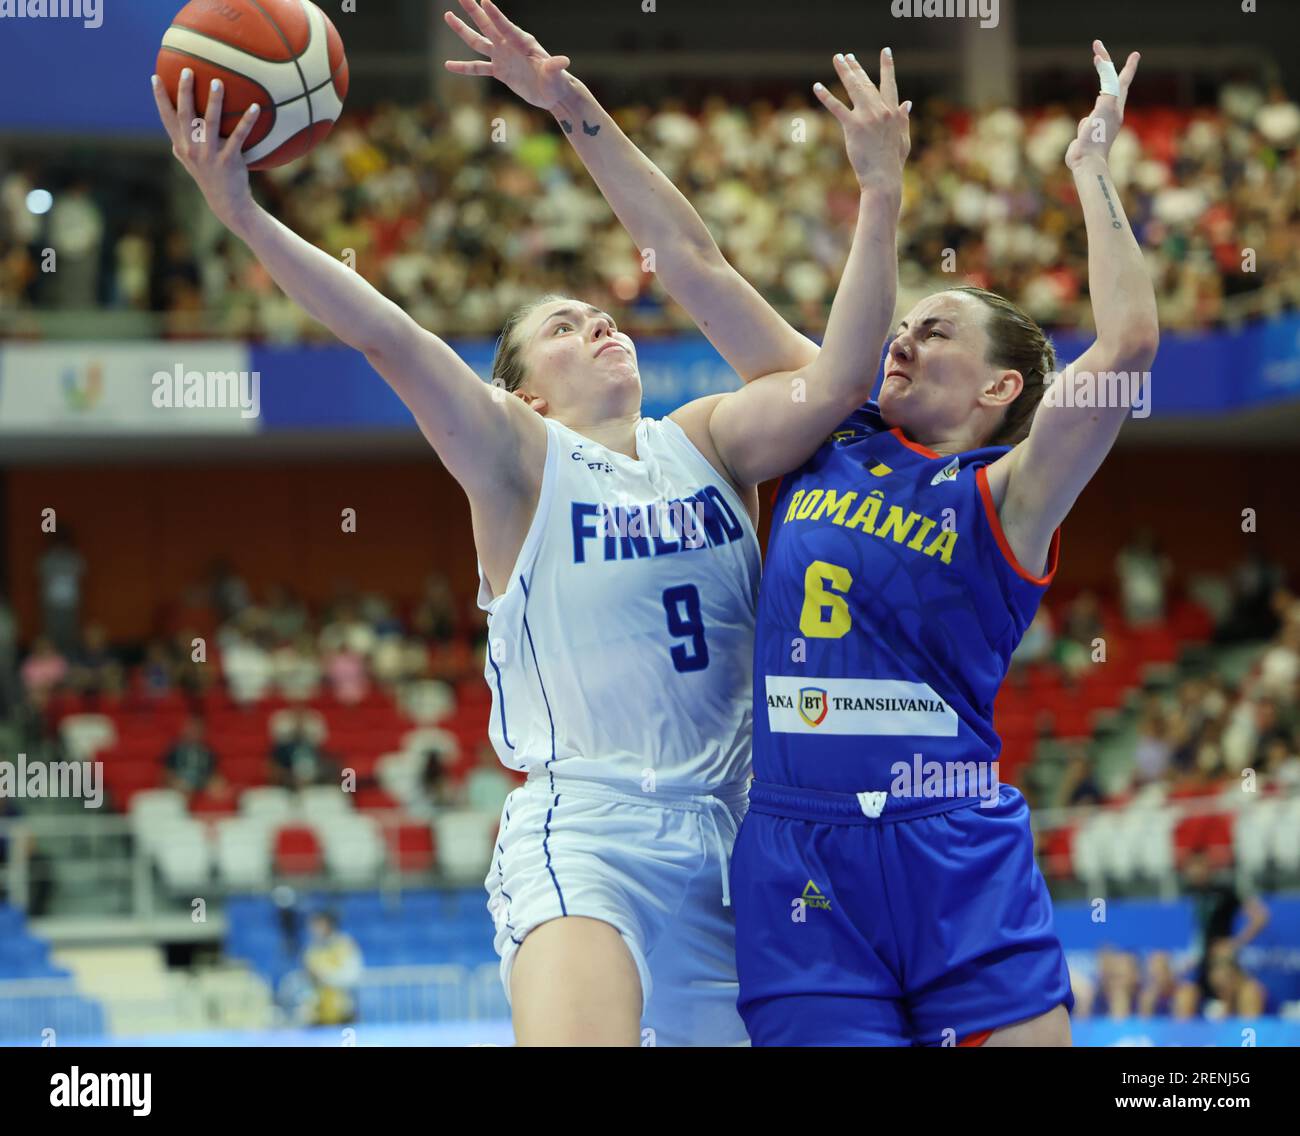 Chengdu, China's Sichuan Province. 29th July, 2023. Lotta-maj wilhelmiina Lahtinen (L) of Finland vie swith Bianca Nan of Romania during the basketball women's preliminary round group C match between Finland and Romania at the 31st FISU Summer World University Games in Chengdu, southwest China's Sichuan Province, July 29, 2023. Credit: Yang Qing/Xinhua/Alamy Live News Stock Photo